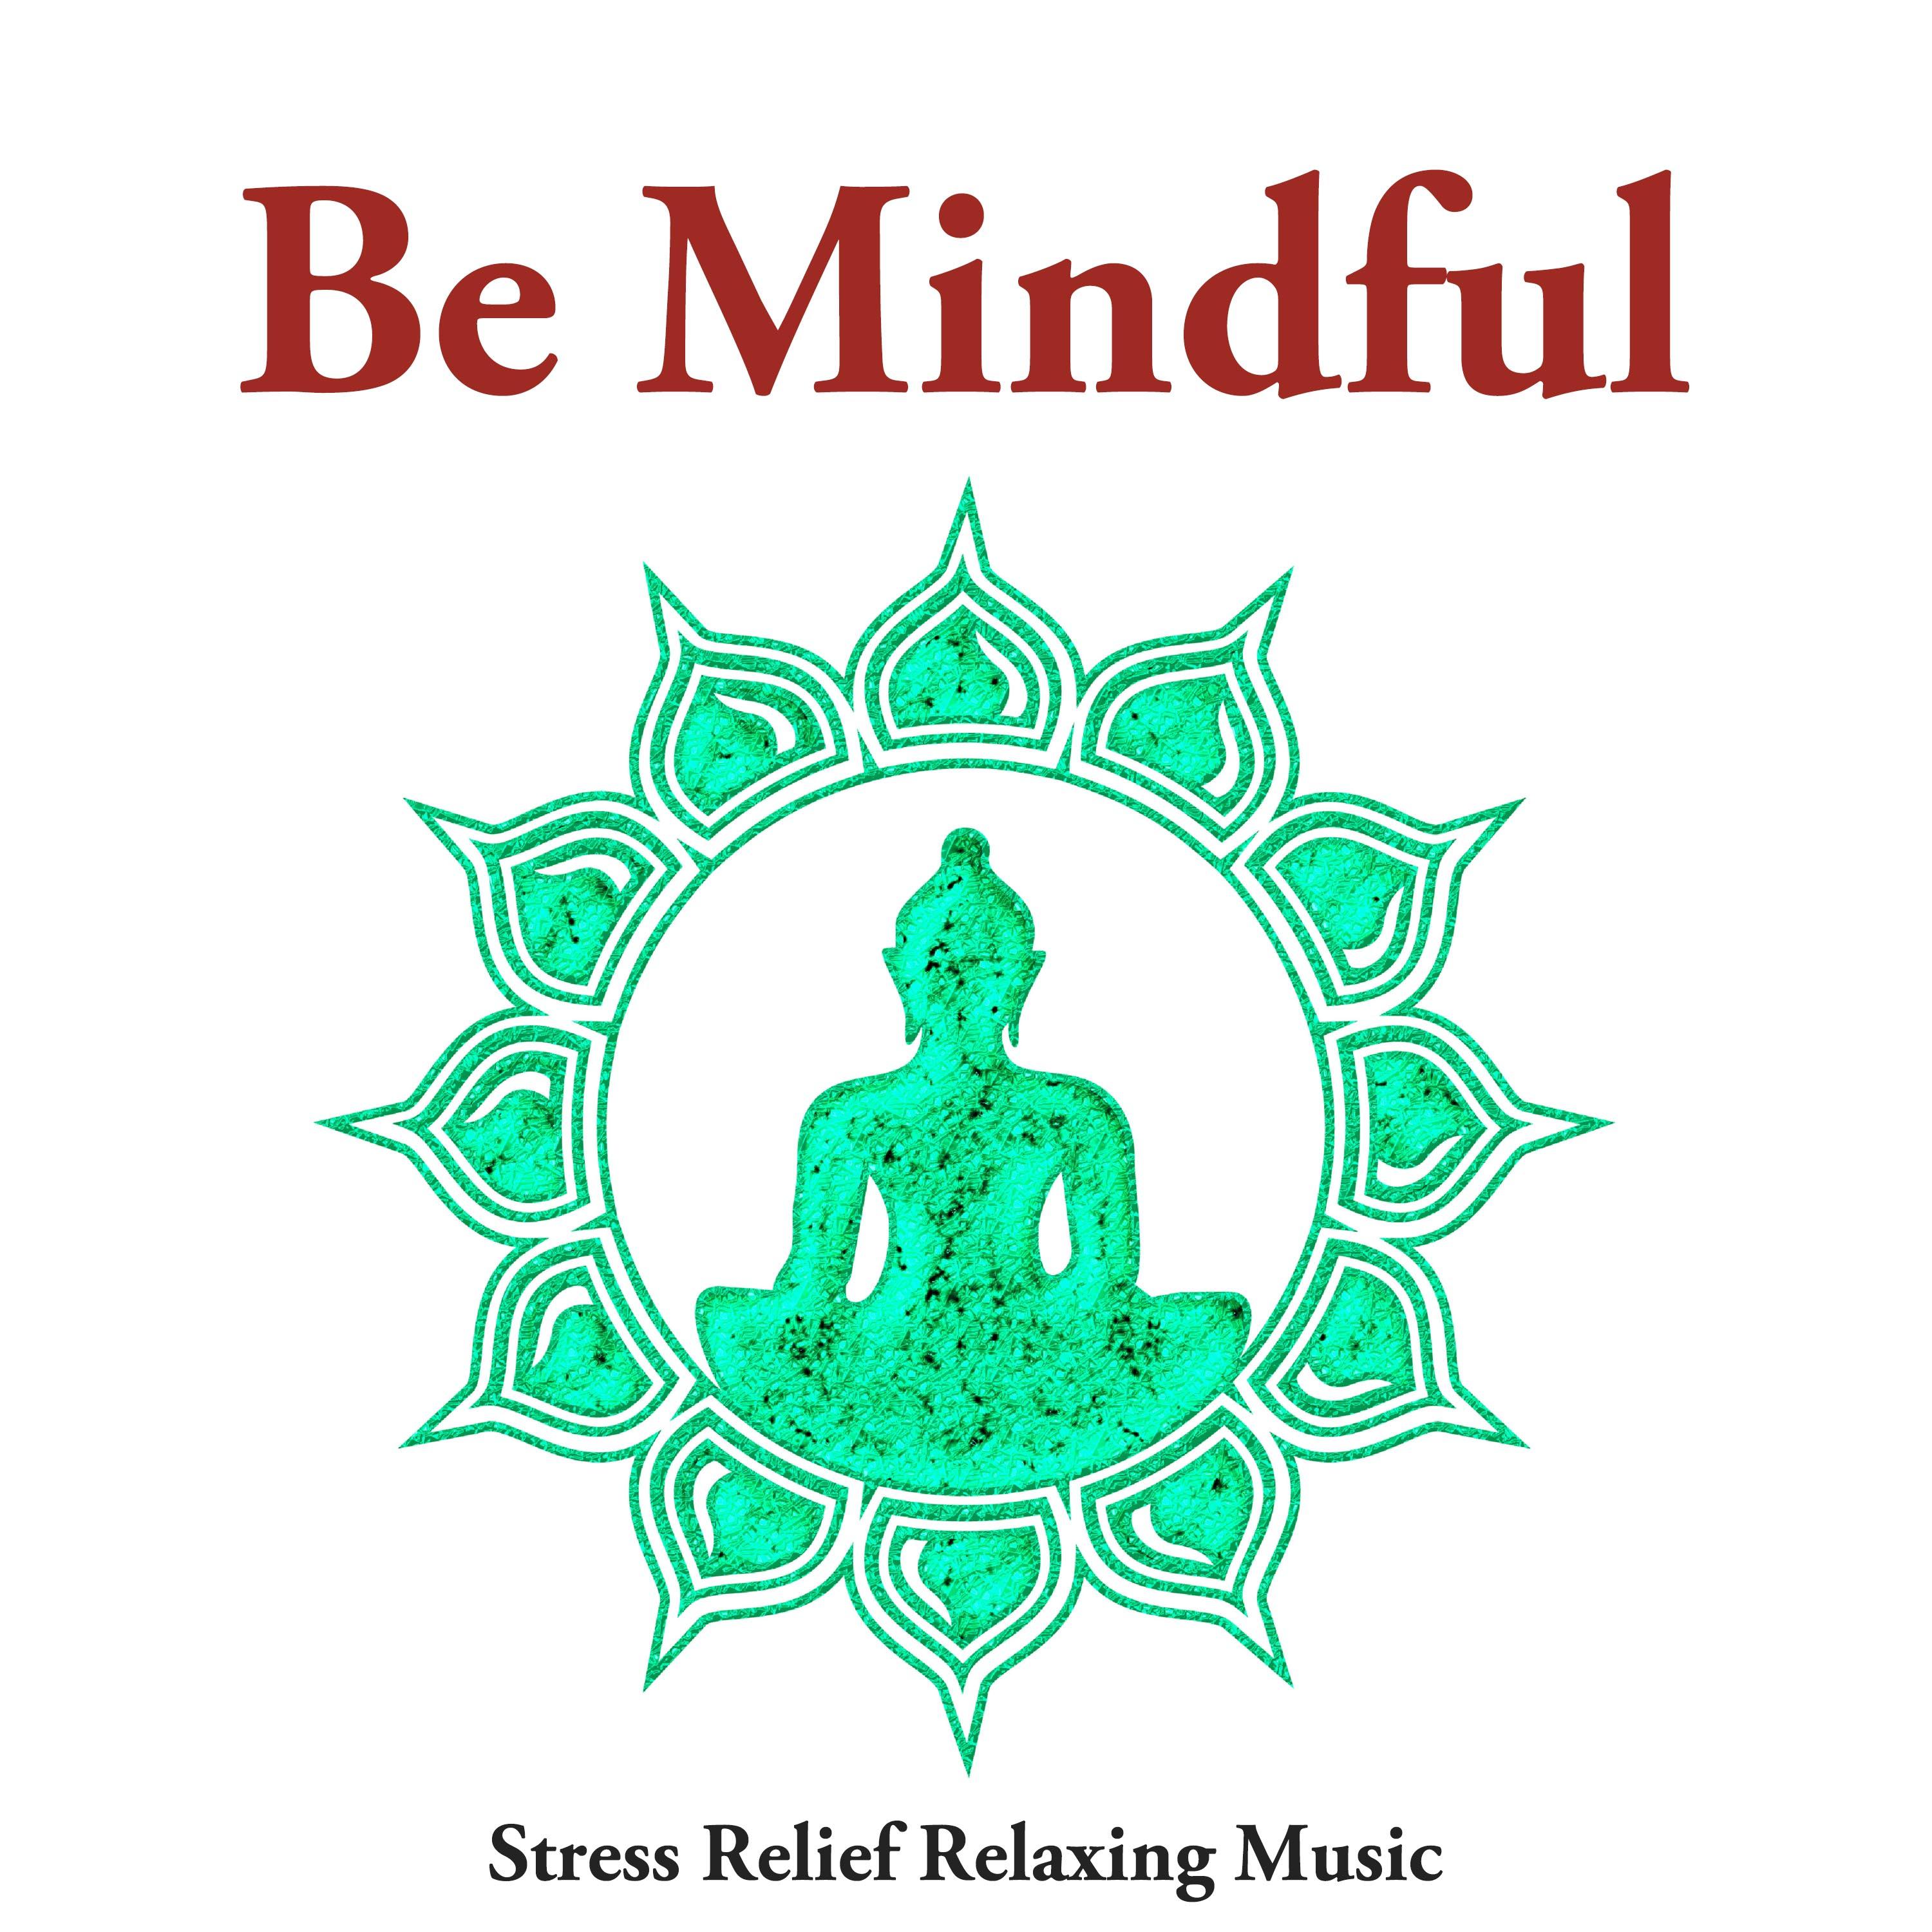 Be Mindful - Stress Relief Relaxing Music for Mindfulness Meditation, Guided Meditation, Meditation Techniques, Relaxation Techniques